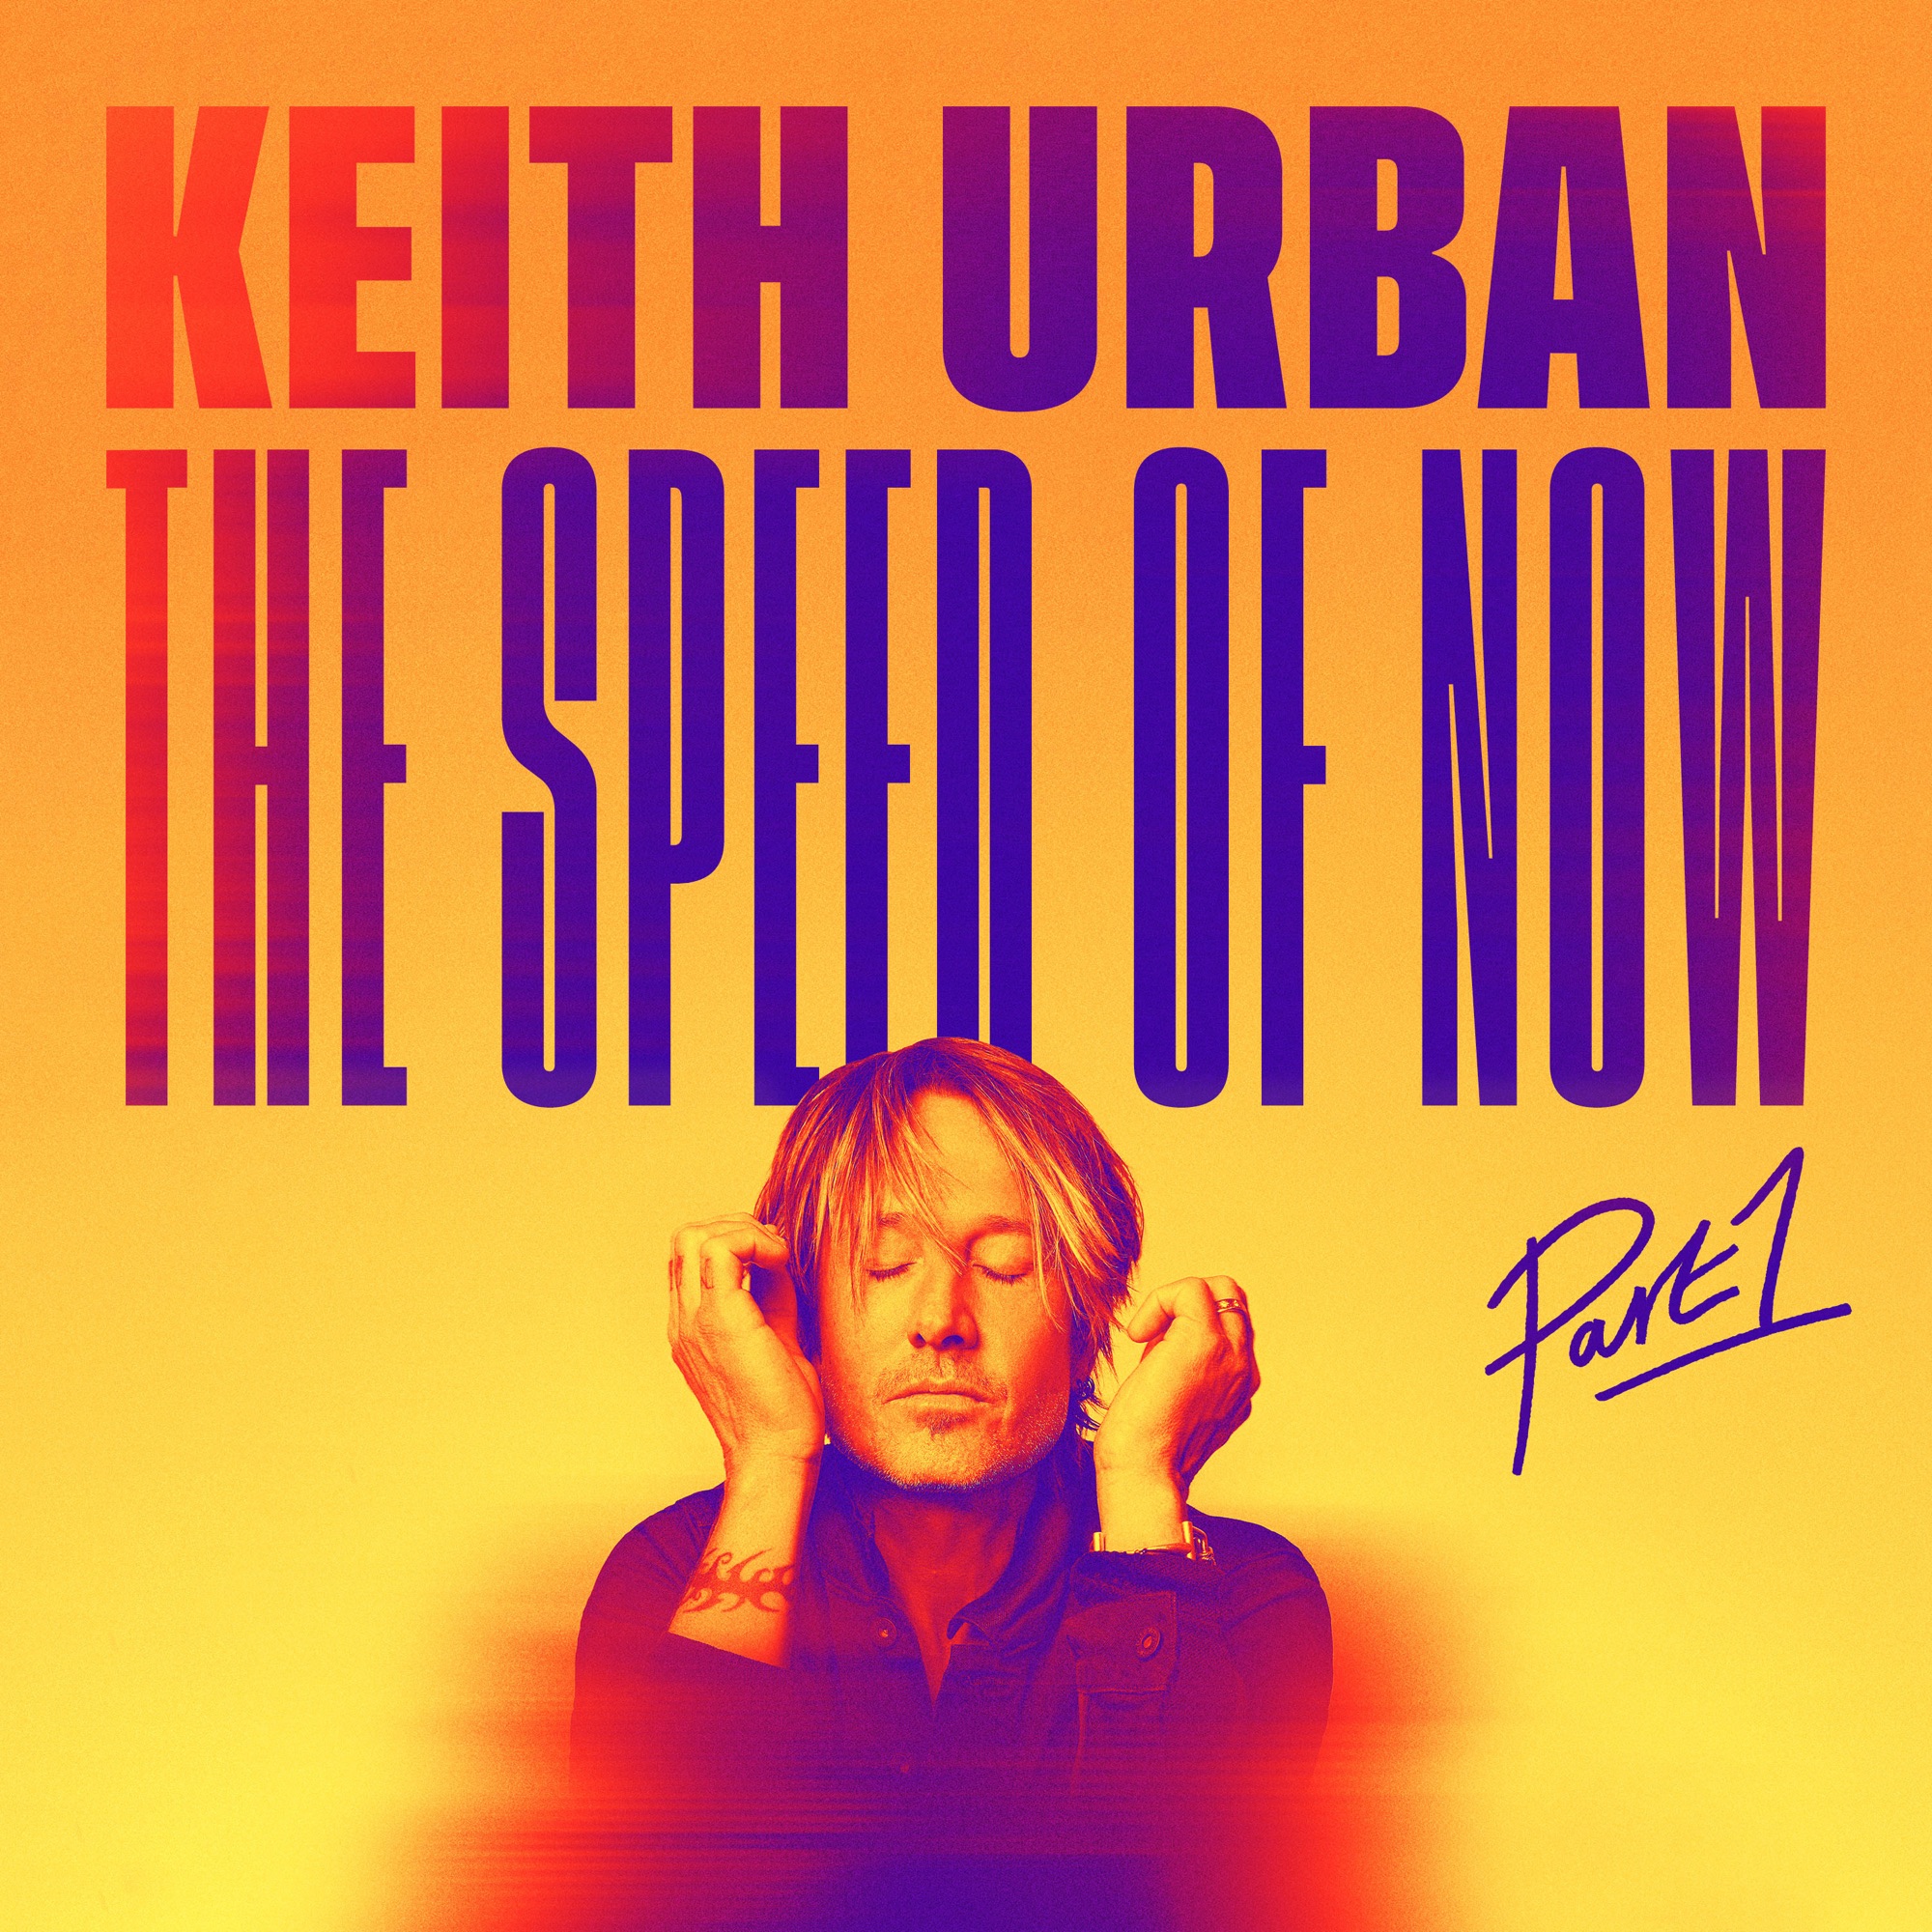 Keith Urban - THE SPEED OF NOW, Pt. 1